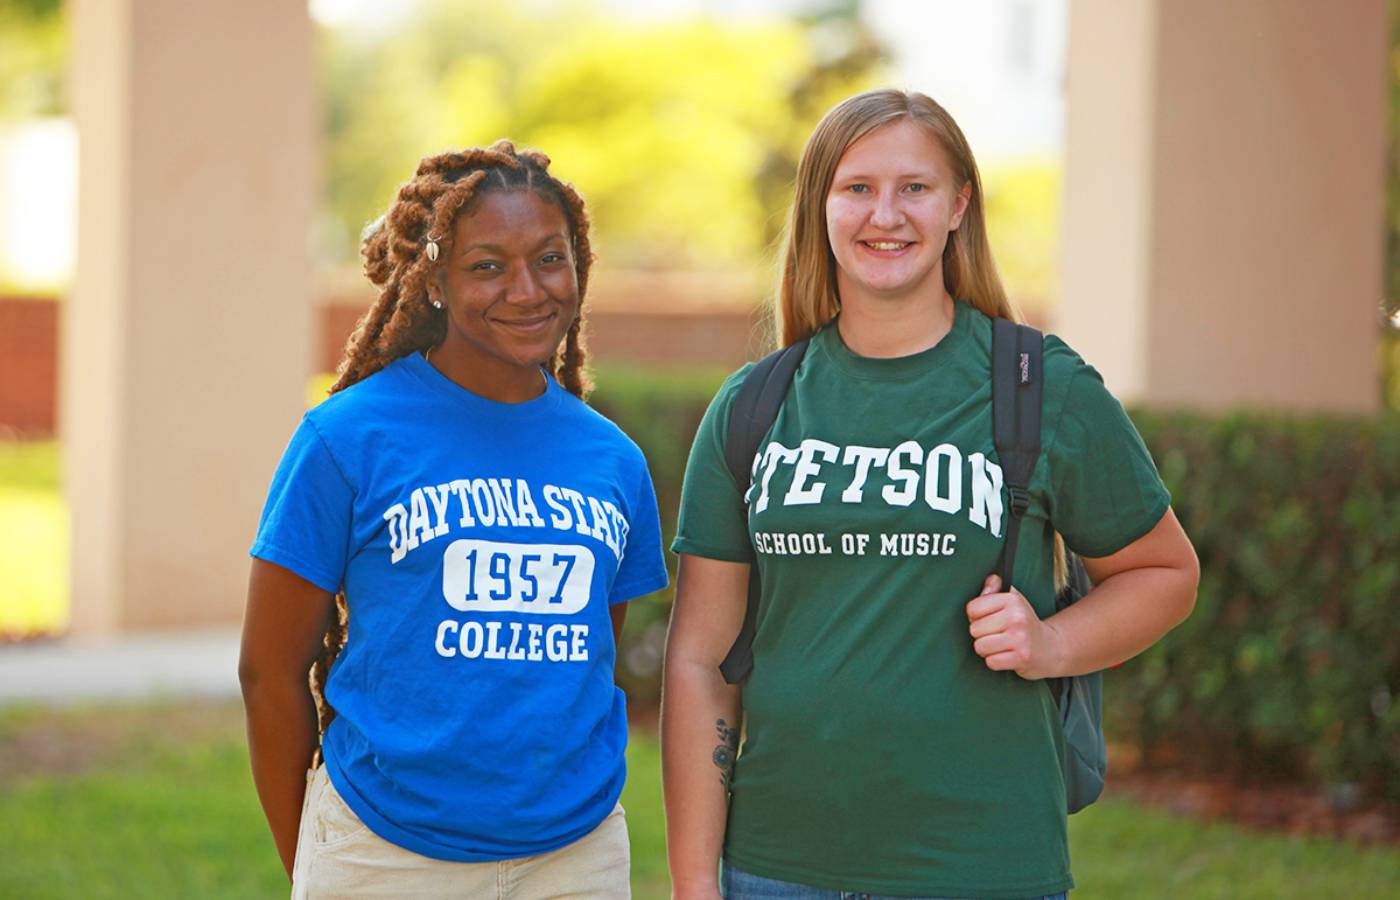 two students, one in DSC tshirt and one in Stetson School of Music tshirt